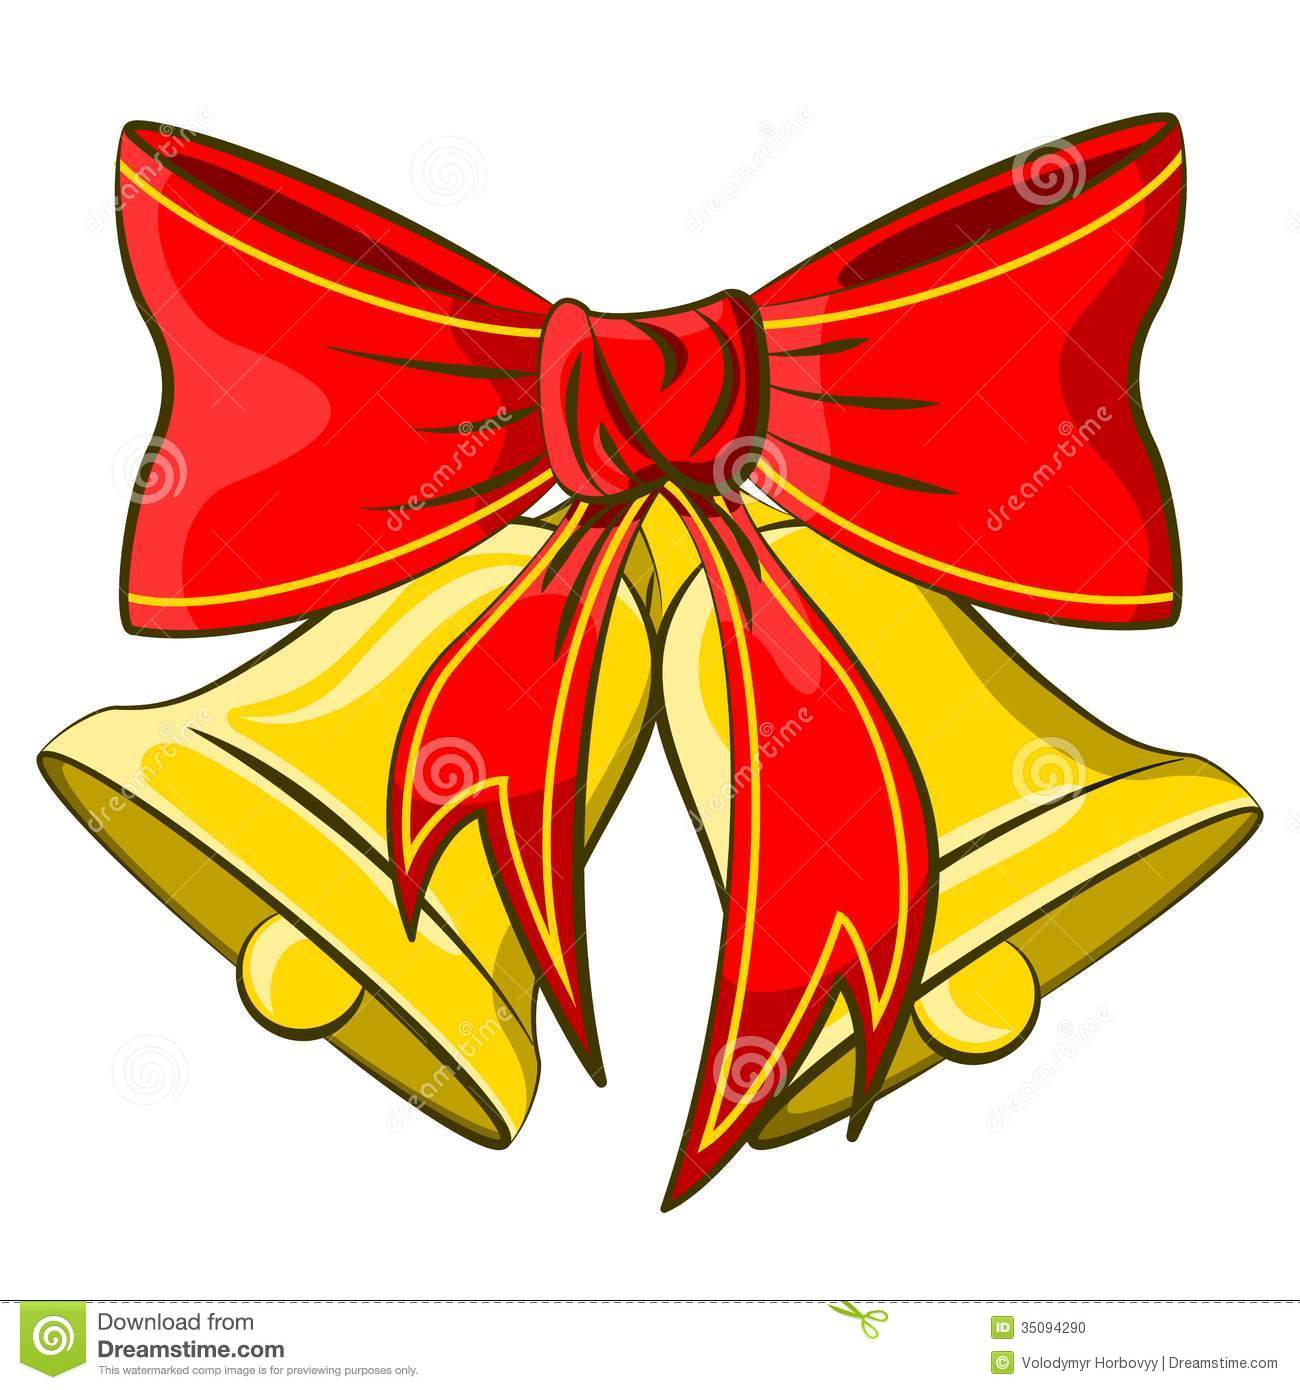 Jingle Bells With Red Bow On A White Background  Vector Illustration